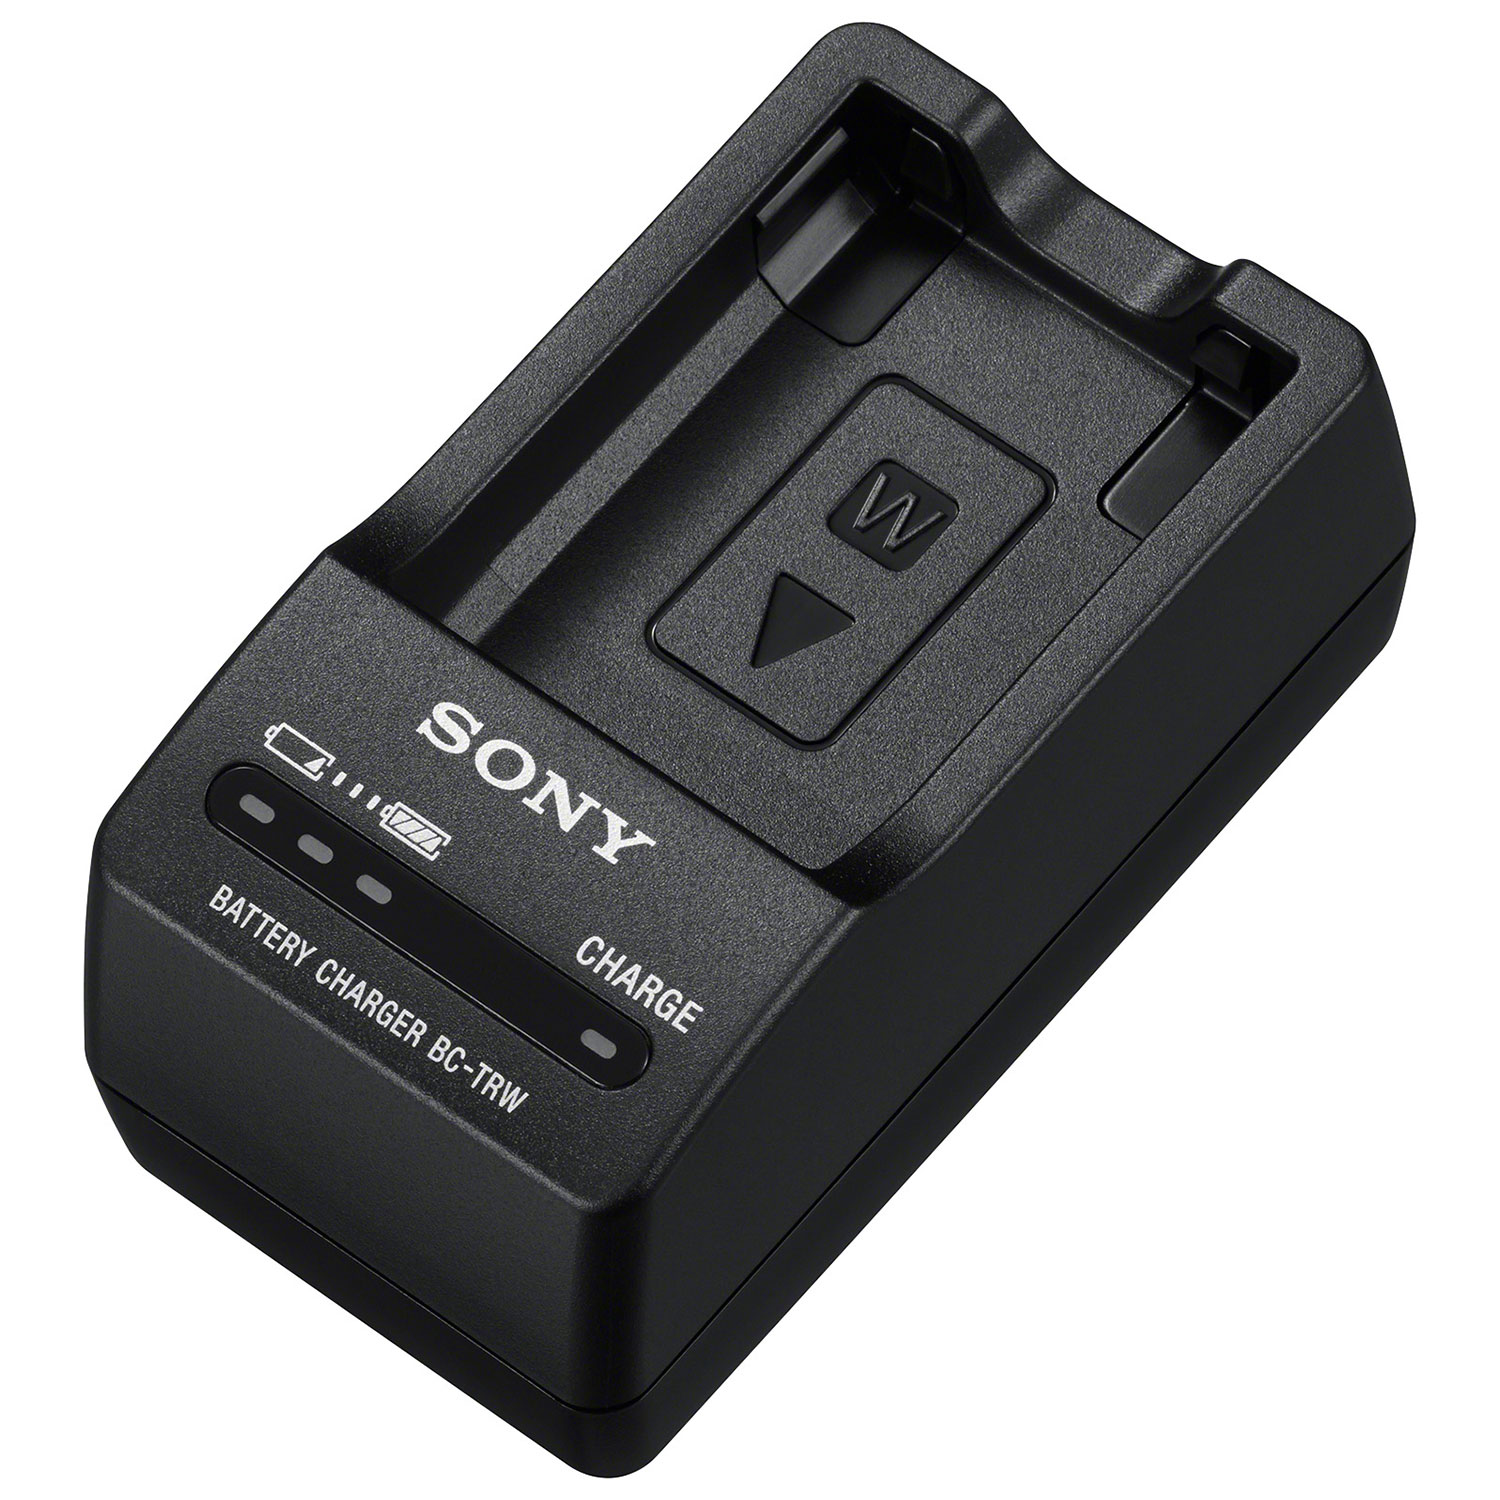 Sony Lithium-Ion BC-TRW Battery Charger (BCTRW)